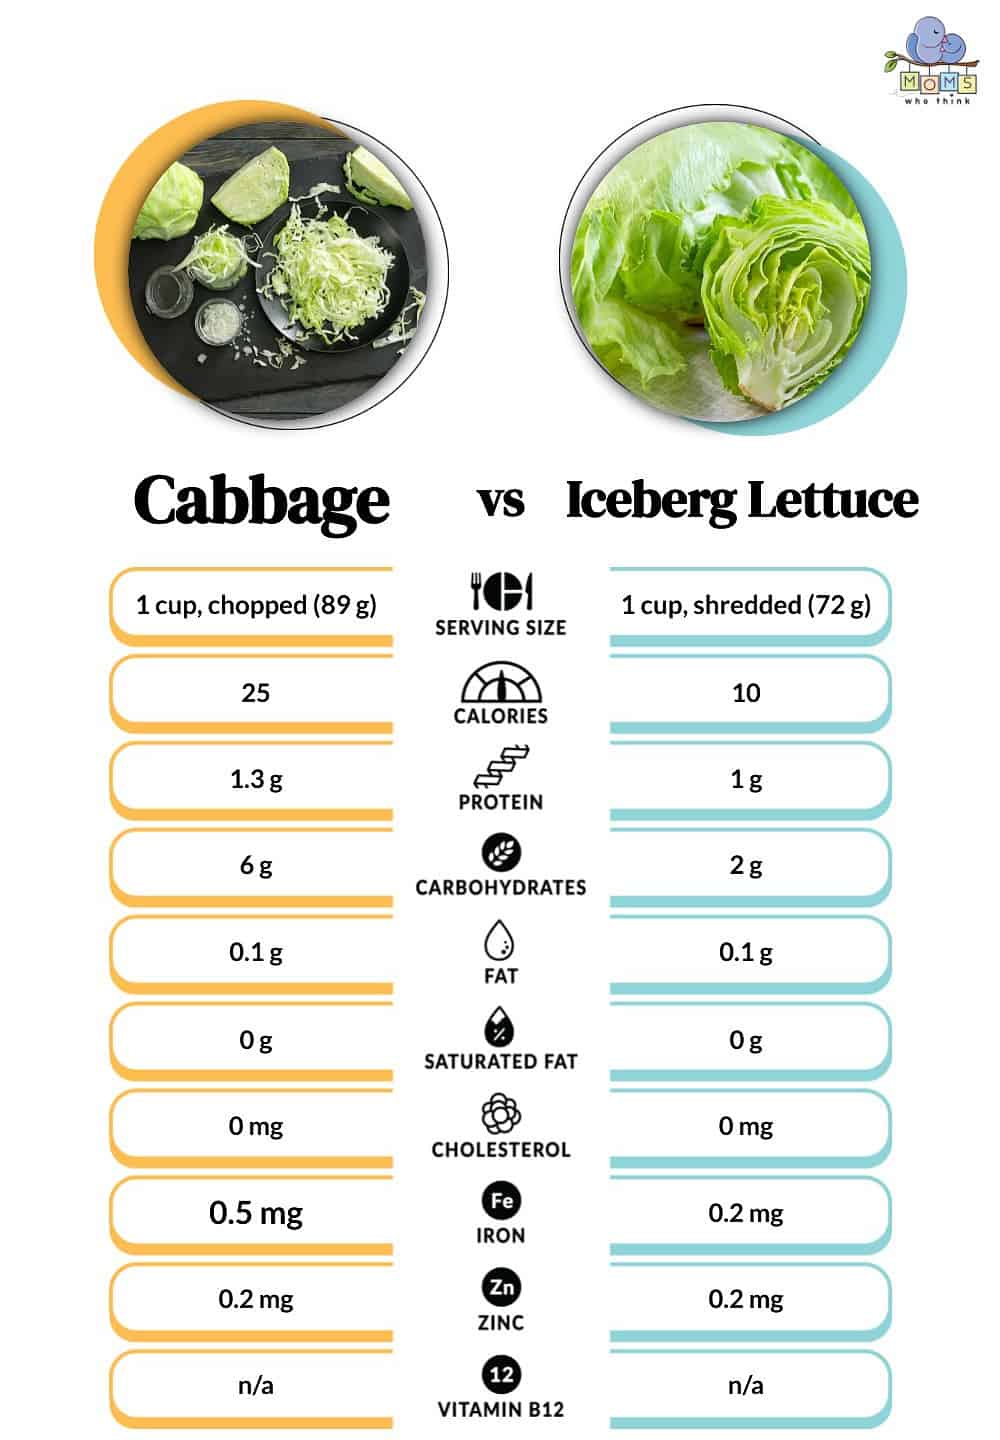 Cabbage vs Iceberg Lettuce Nutritional Facts